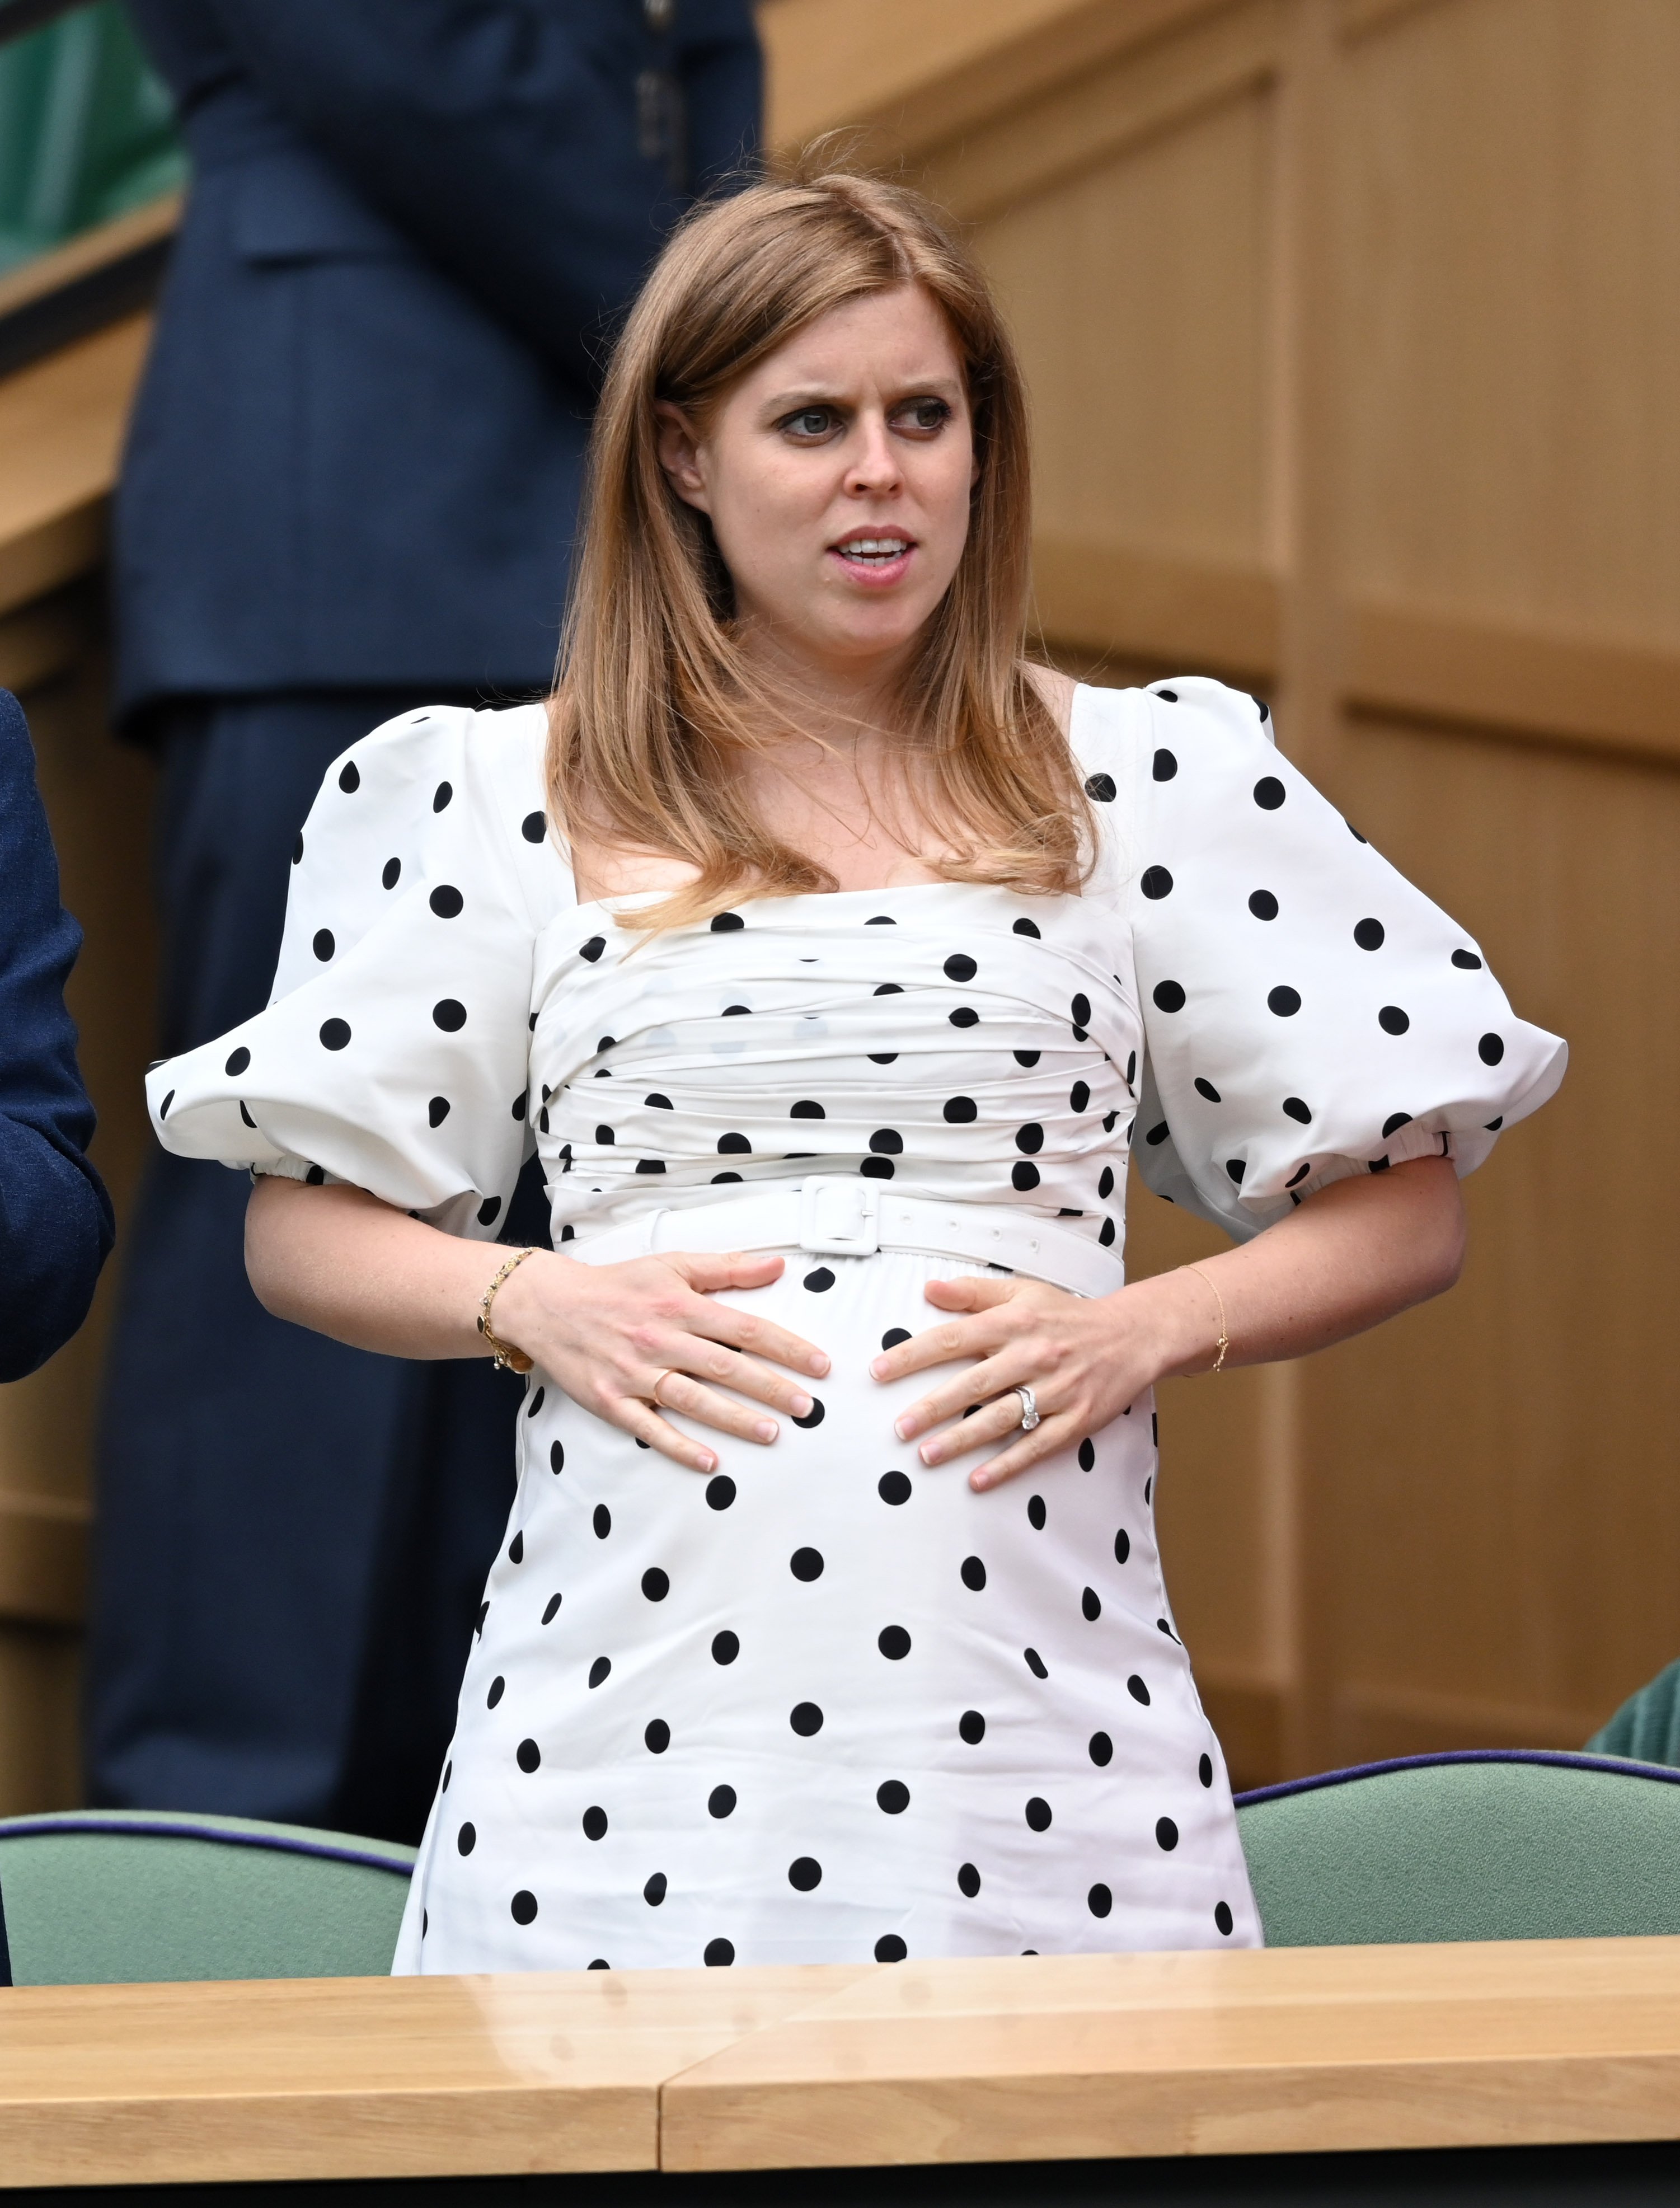  Princess Beatrice of York attends the Wimbledon Tennis Championships at the All England Lawn Tennis and Croquet Club on July 08, 2021 in London, England. | Source: Getty Images